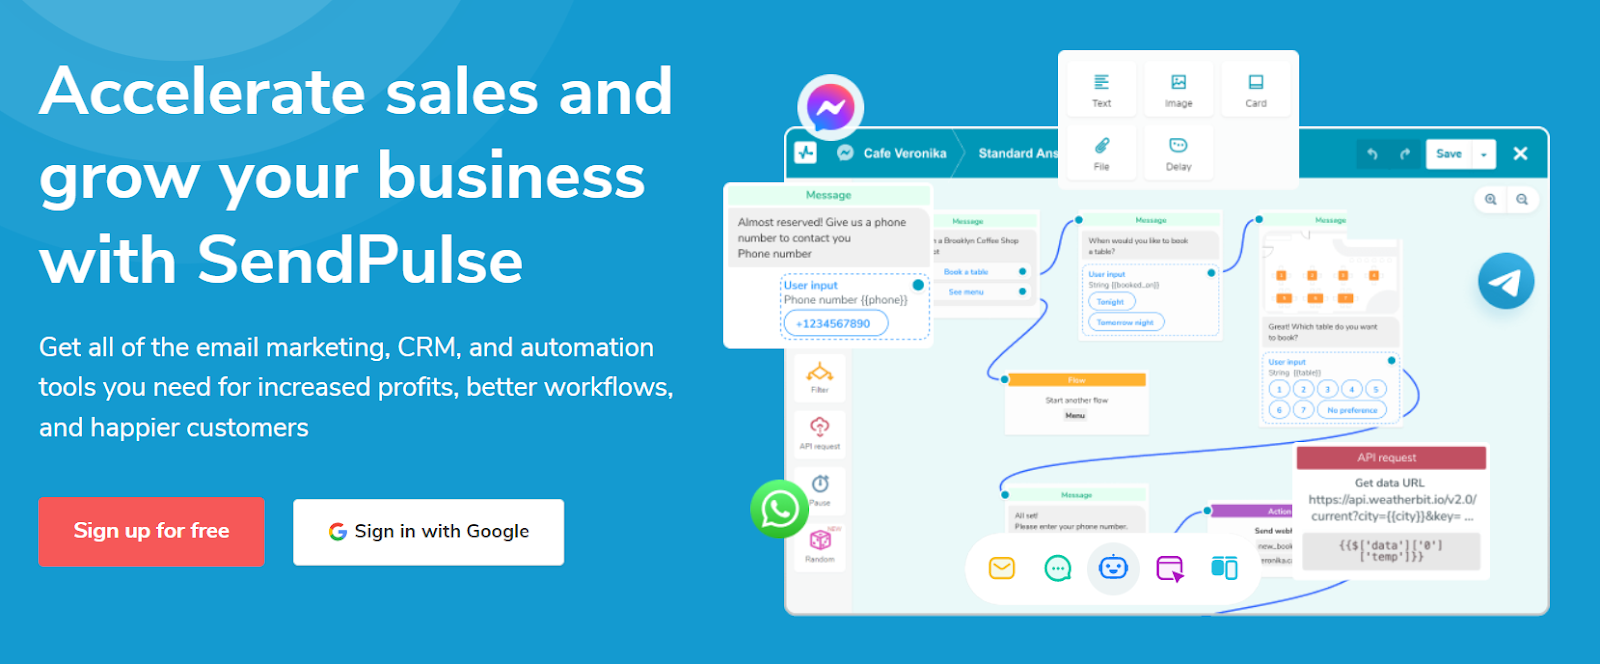 SendPulse is a versatile, all-in-one email automation platform which offers many integration capabilities 